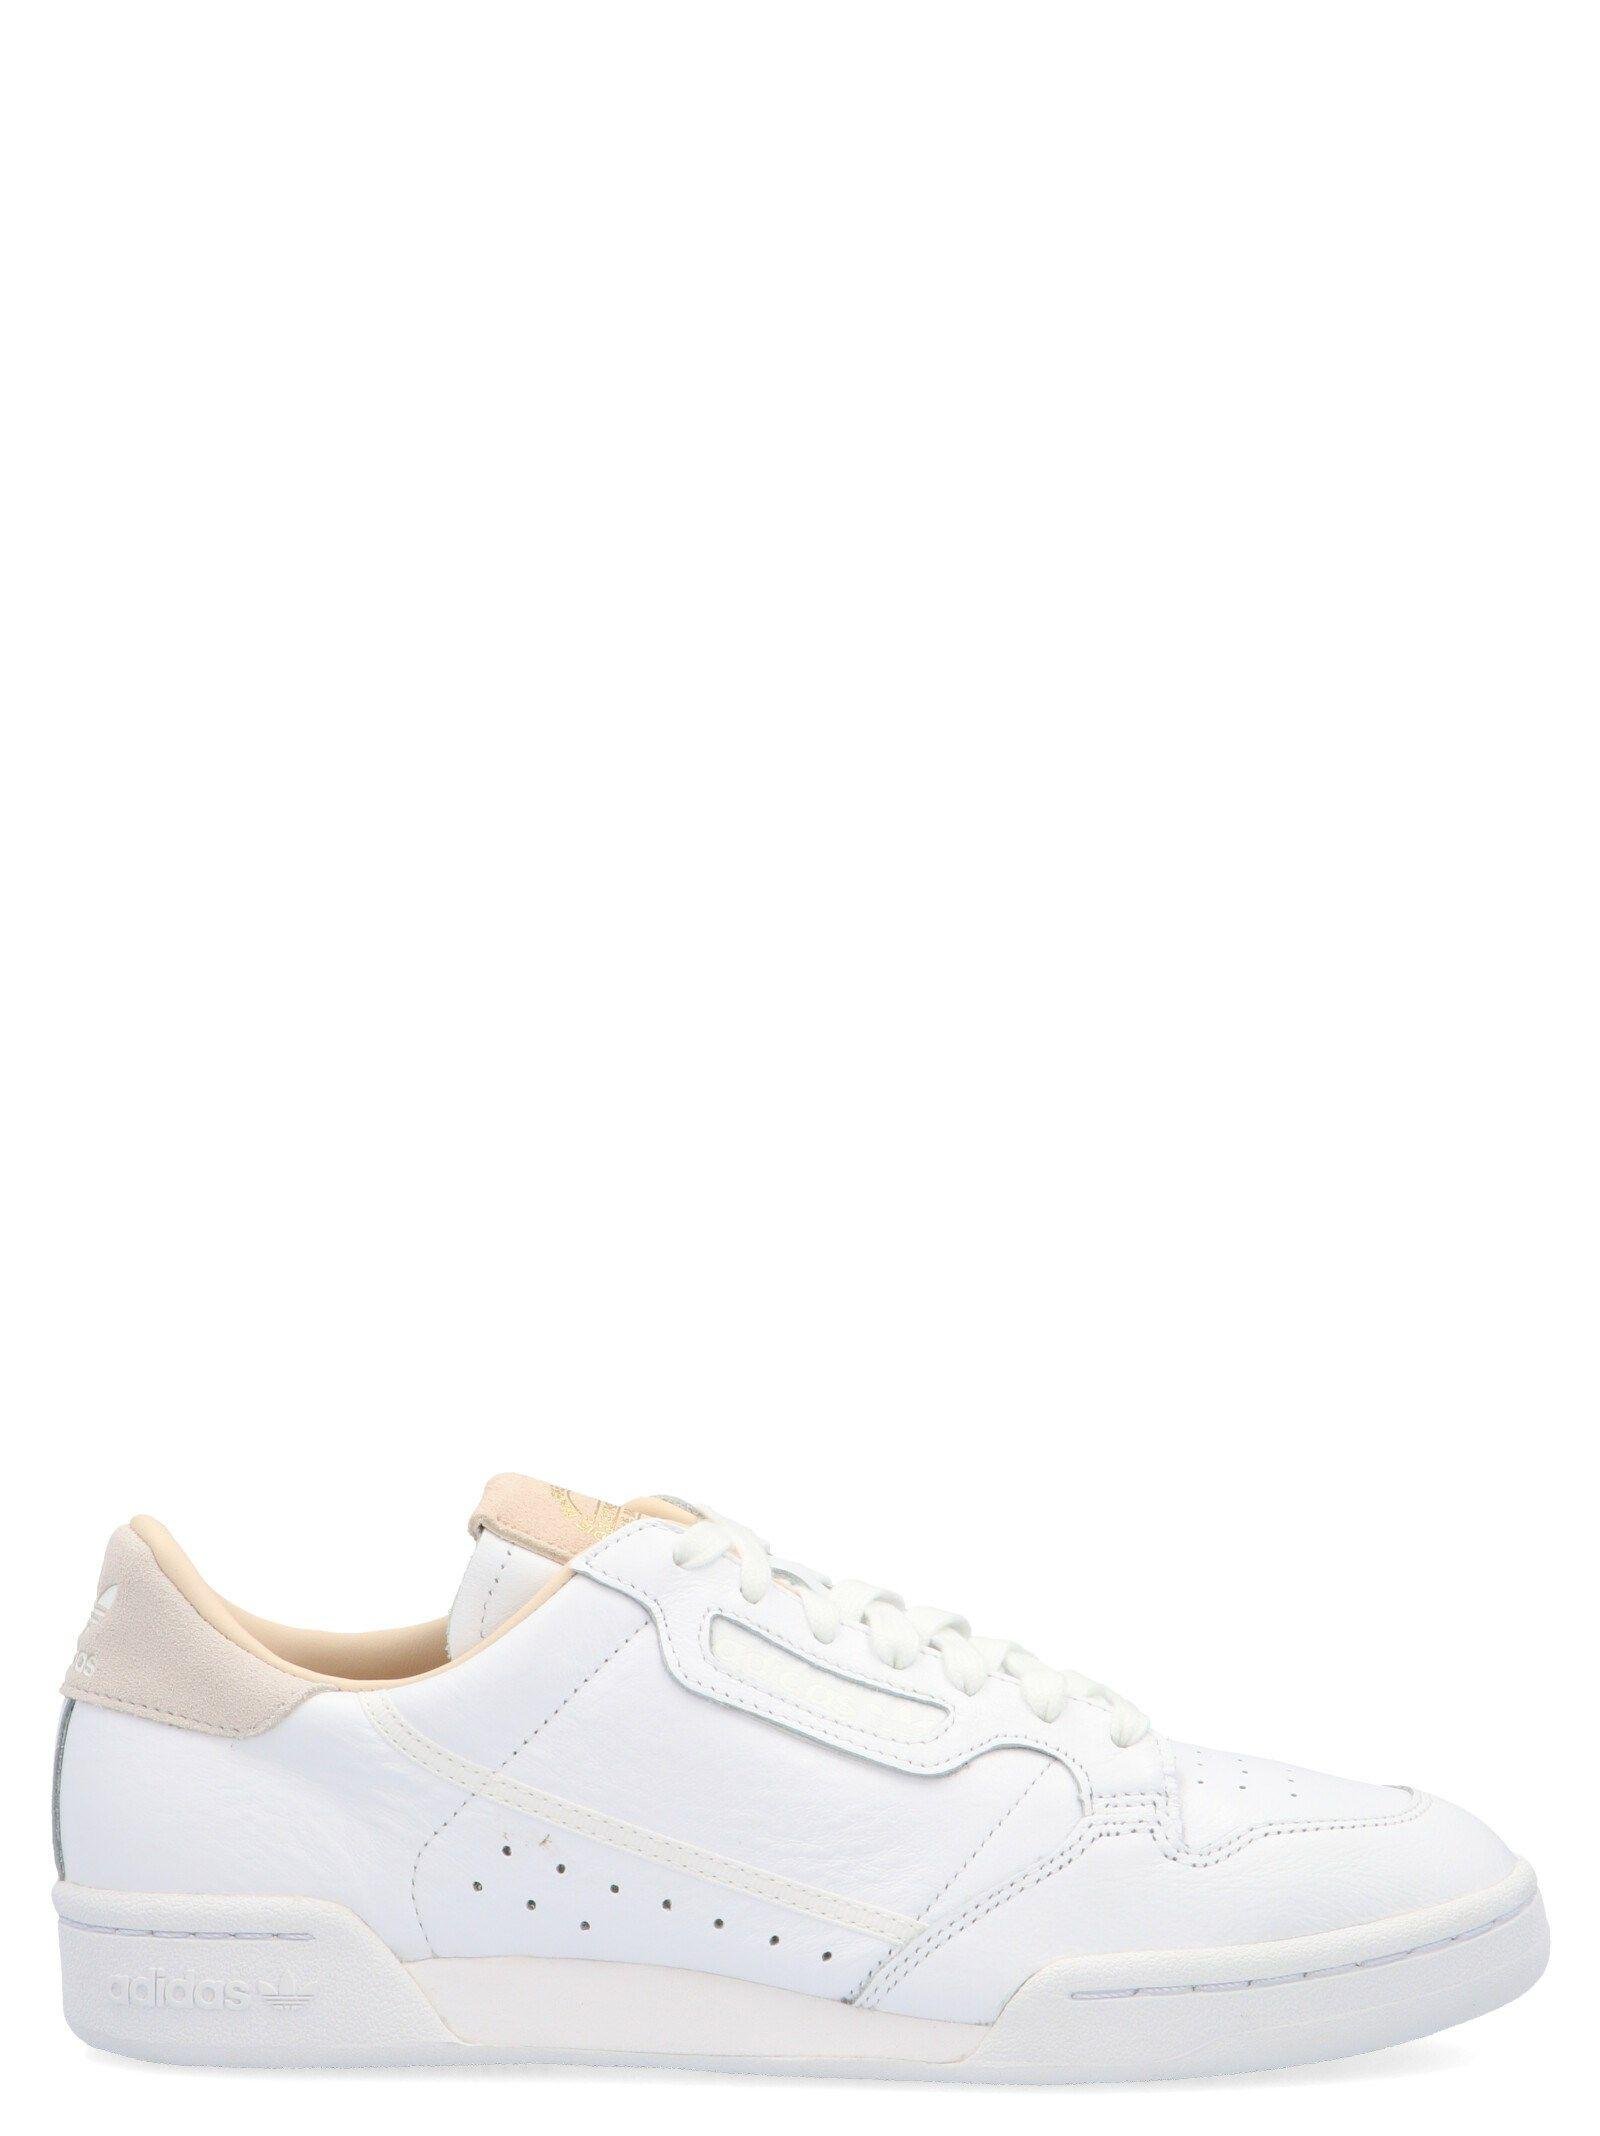 adidas Leather Sneakers in White for Men - Lyst